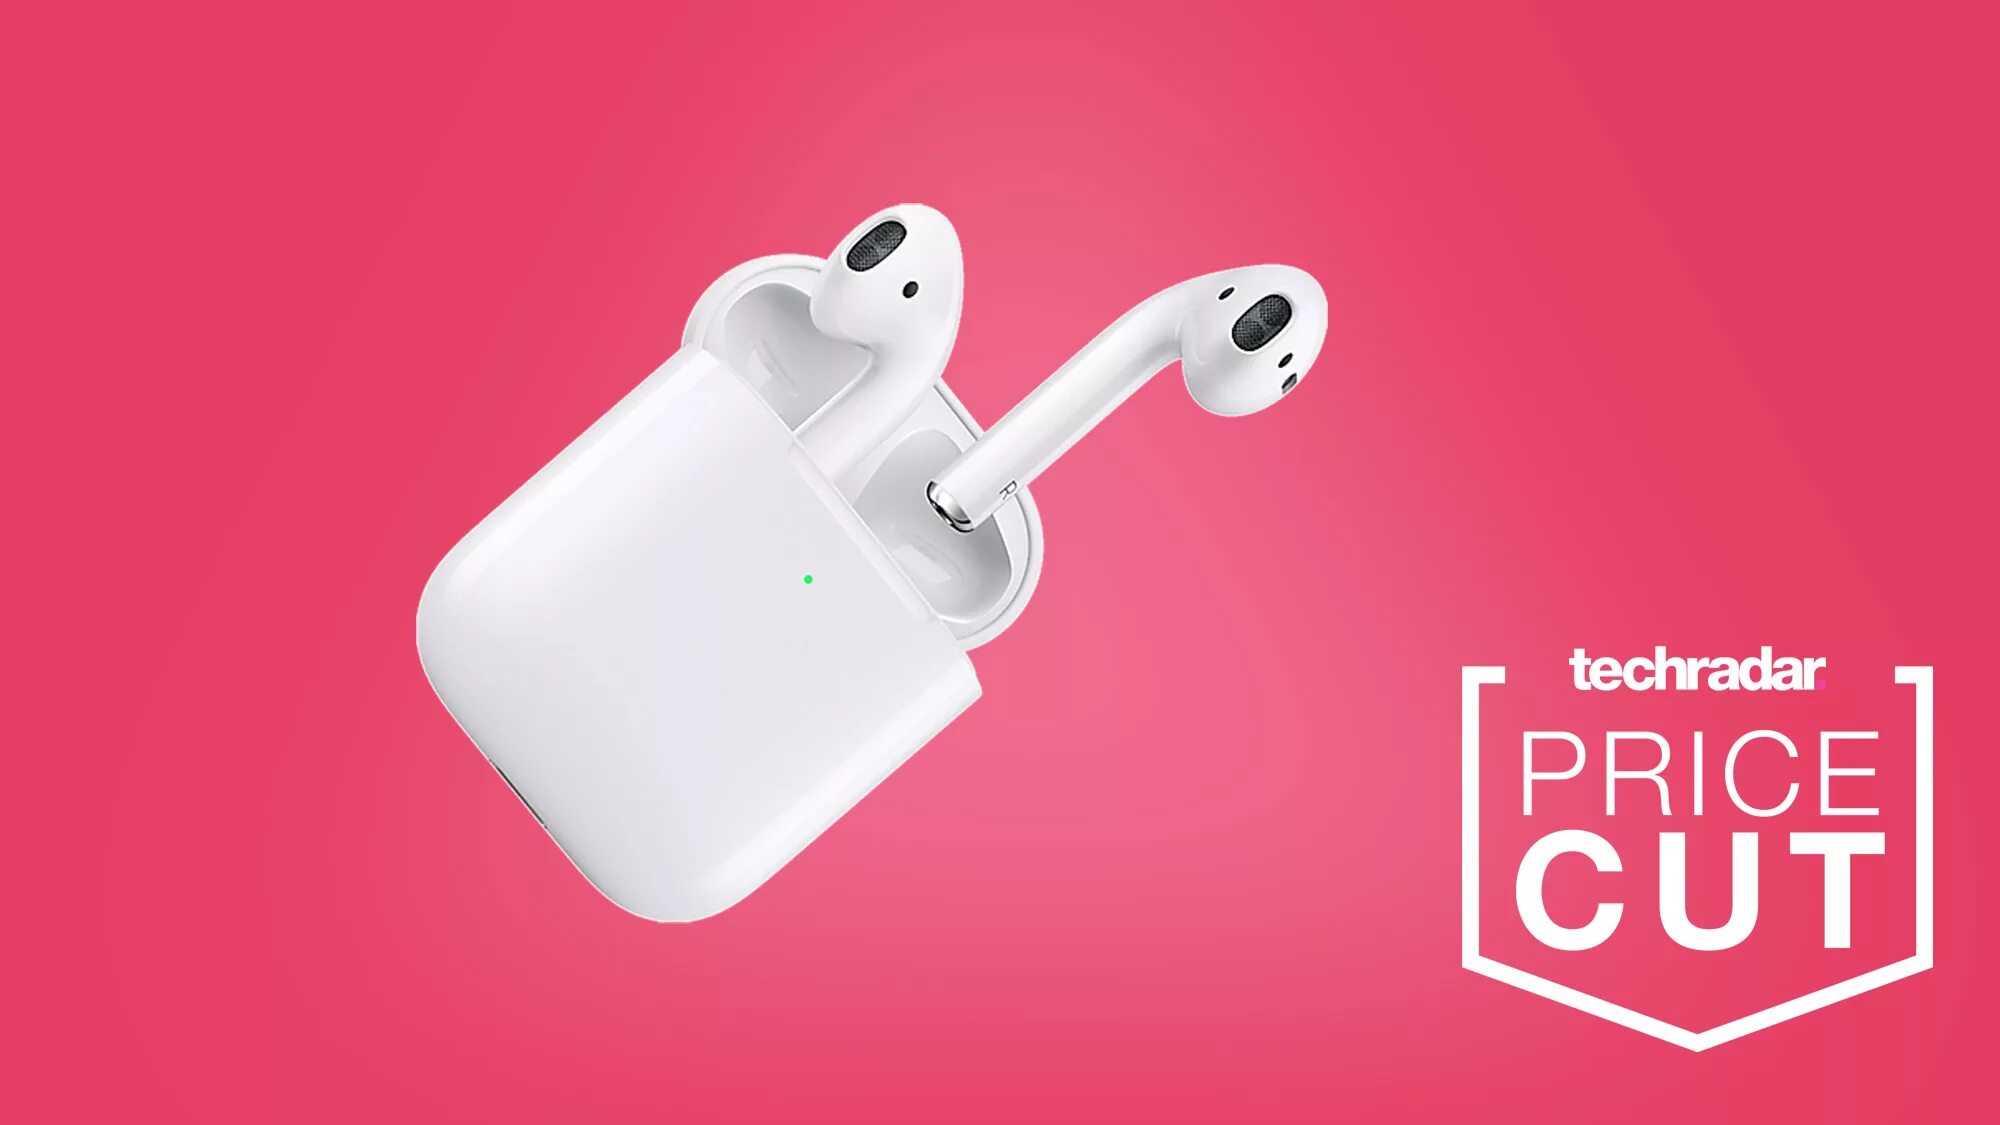 Airpods mv7n2 цены. Apple AIRPODS 2 with Charging Case White (mv7n2am/a). AIRPODS Pro 1st Generation. AIRPODS обои. AIRPODS 3.